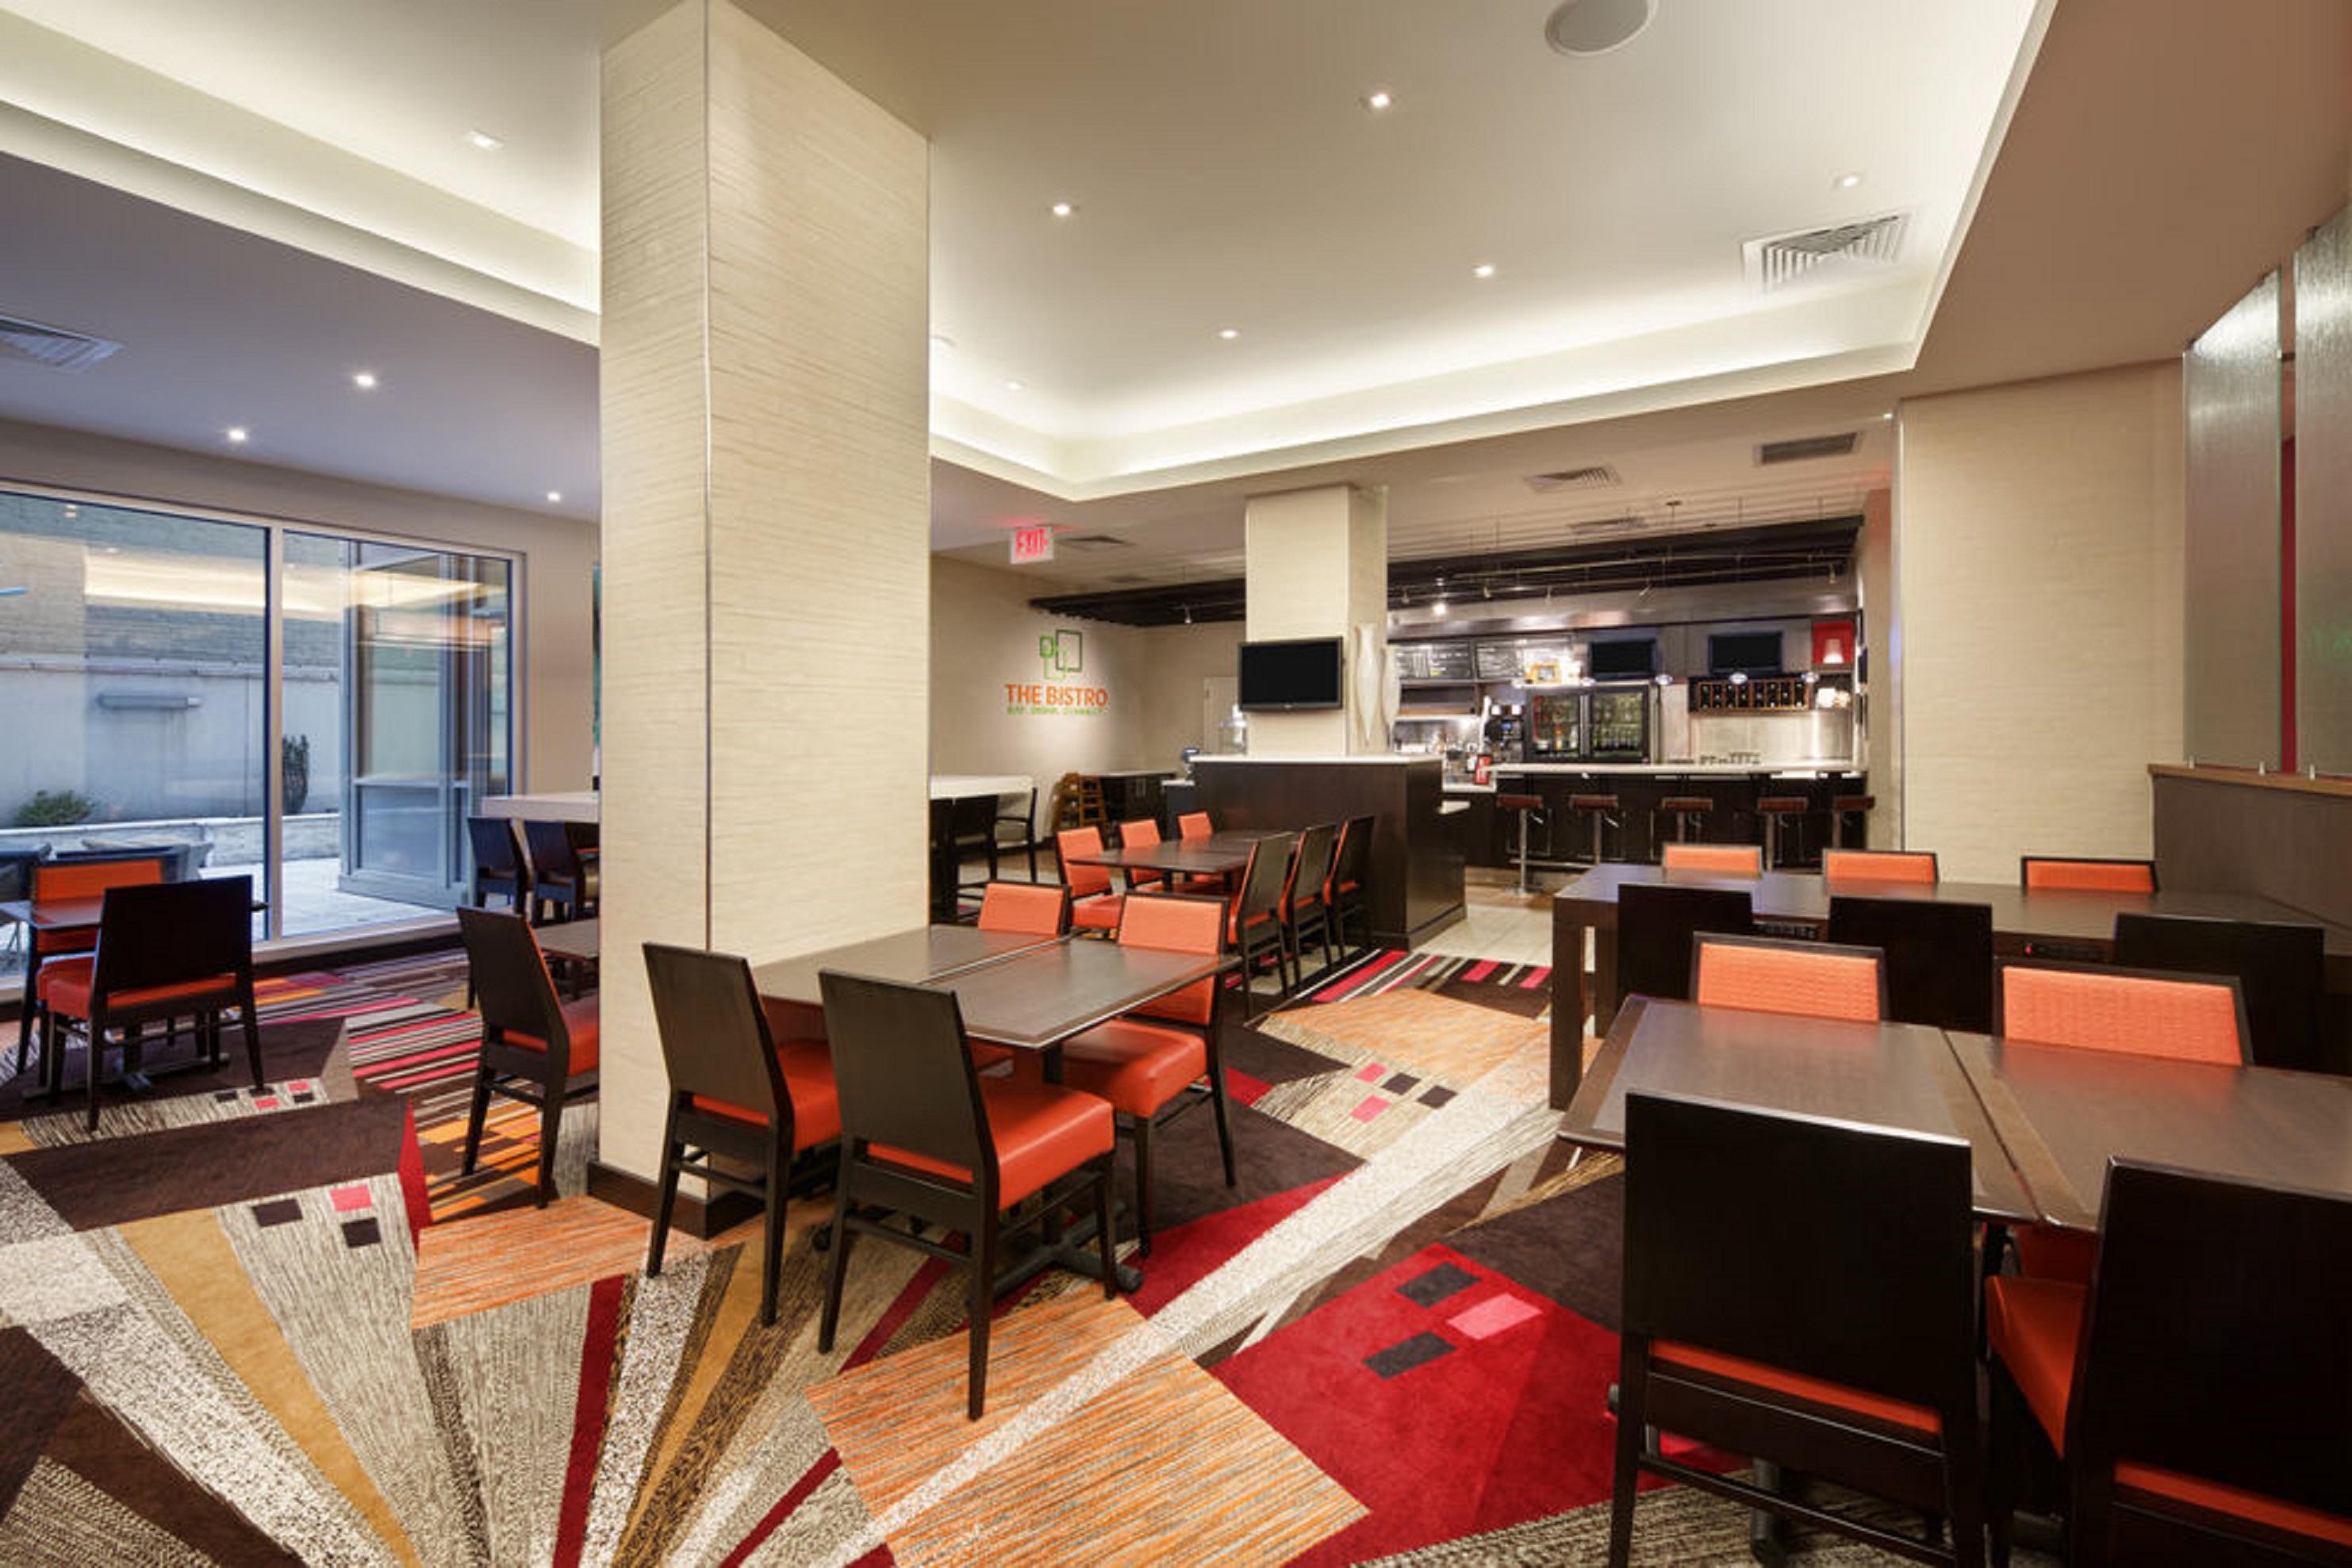 Courtyard By Marriott Times Square West Hotel New York Bagian luar foto